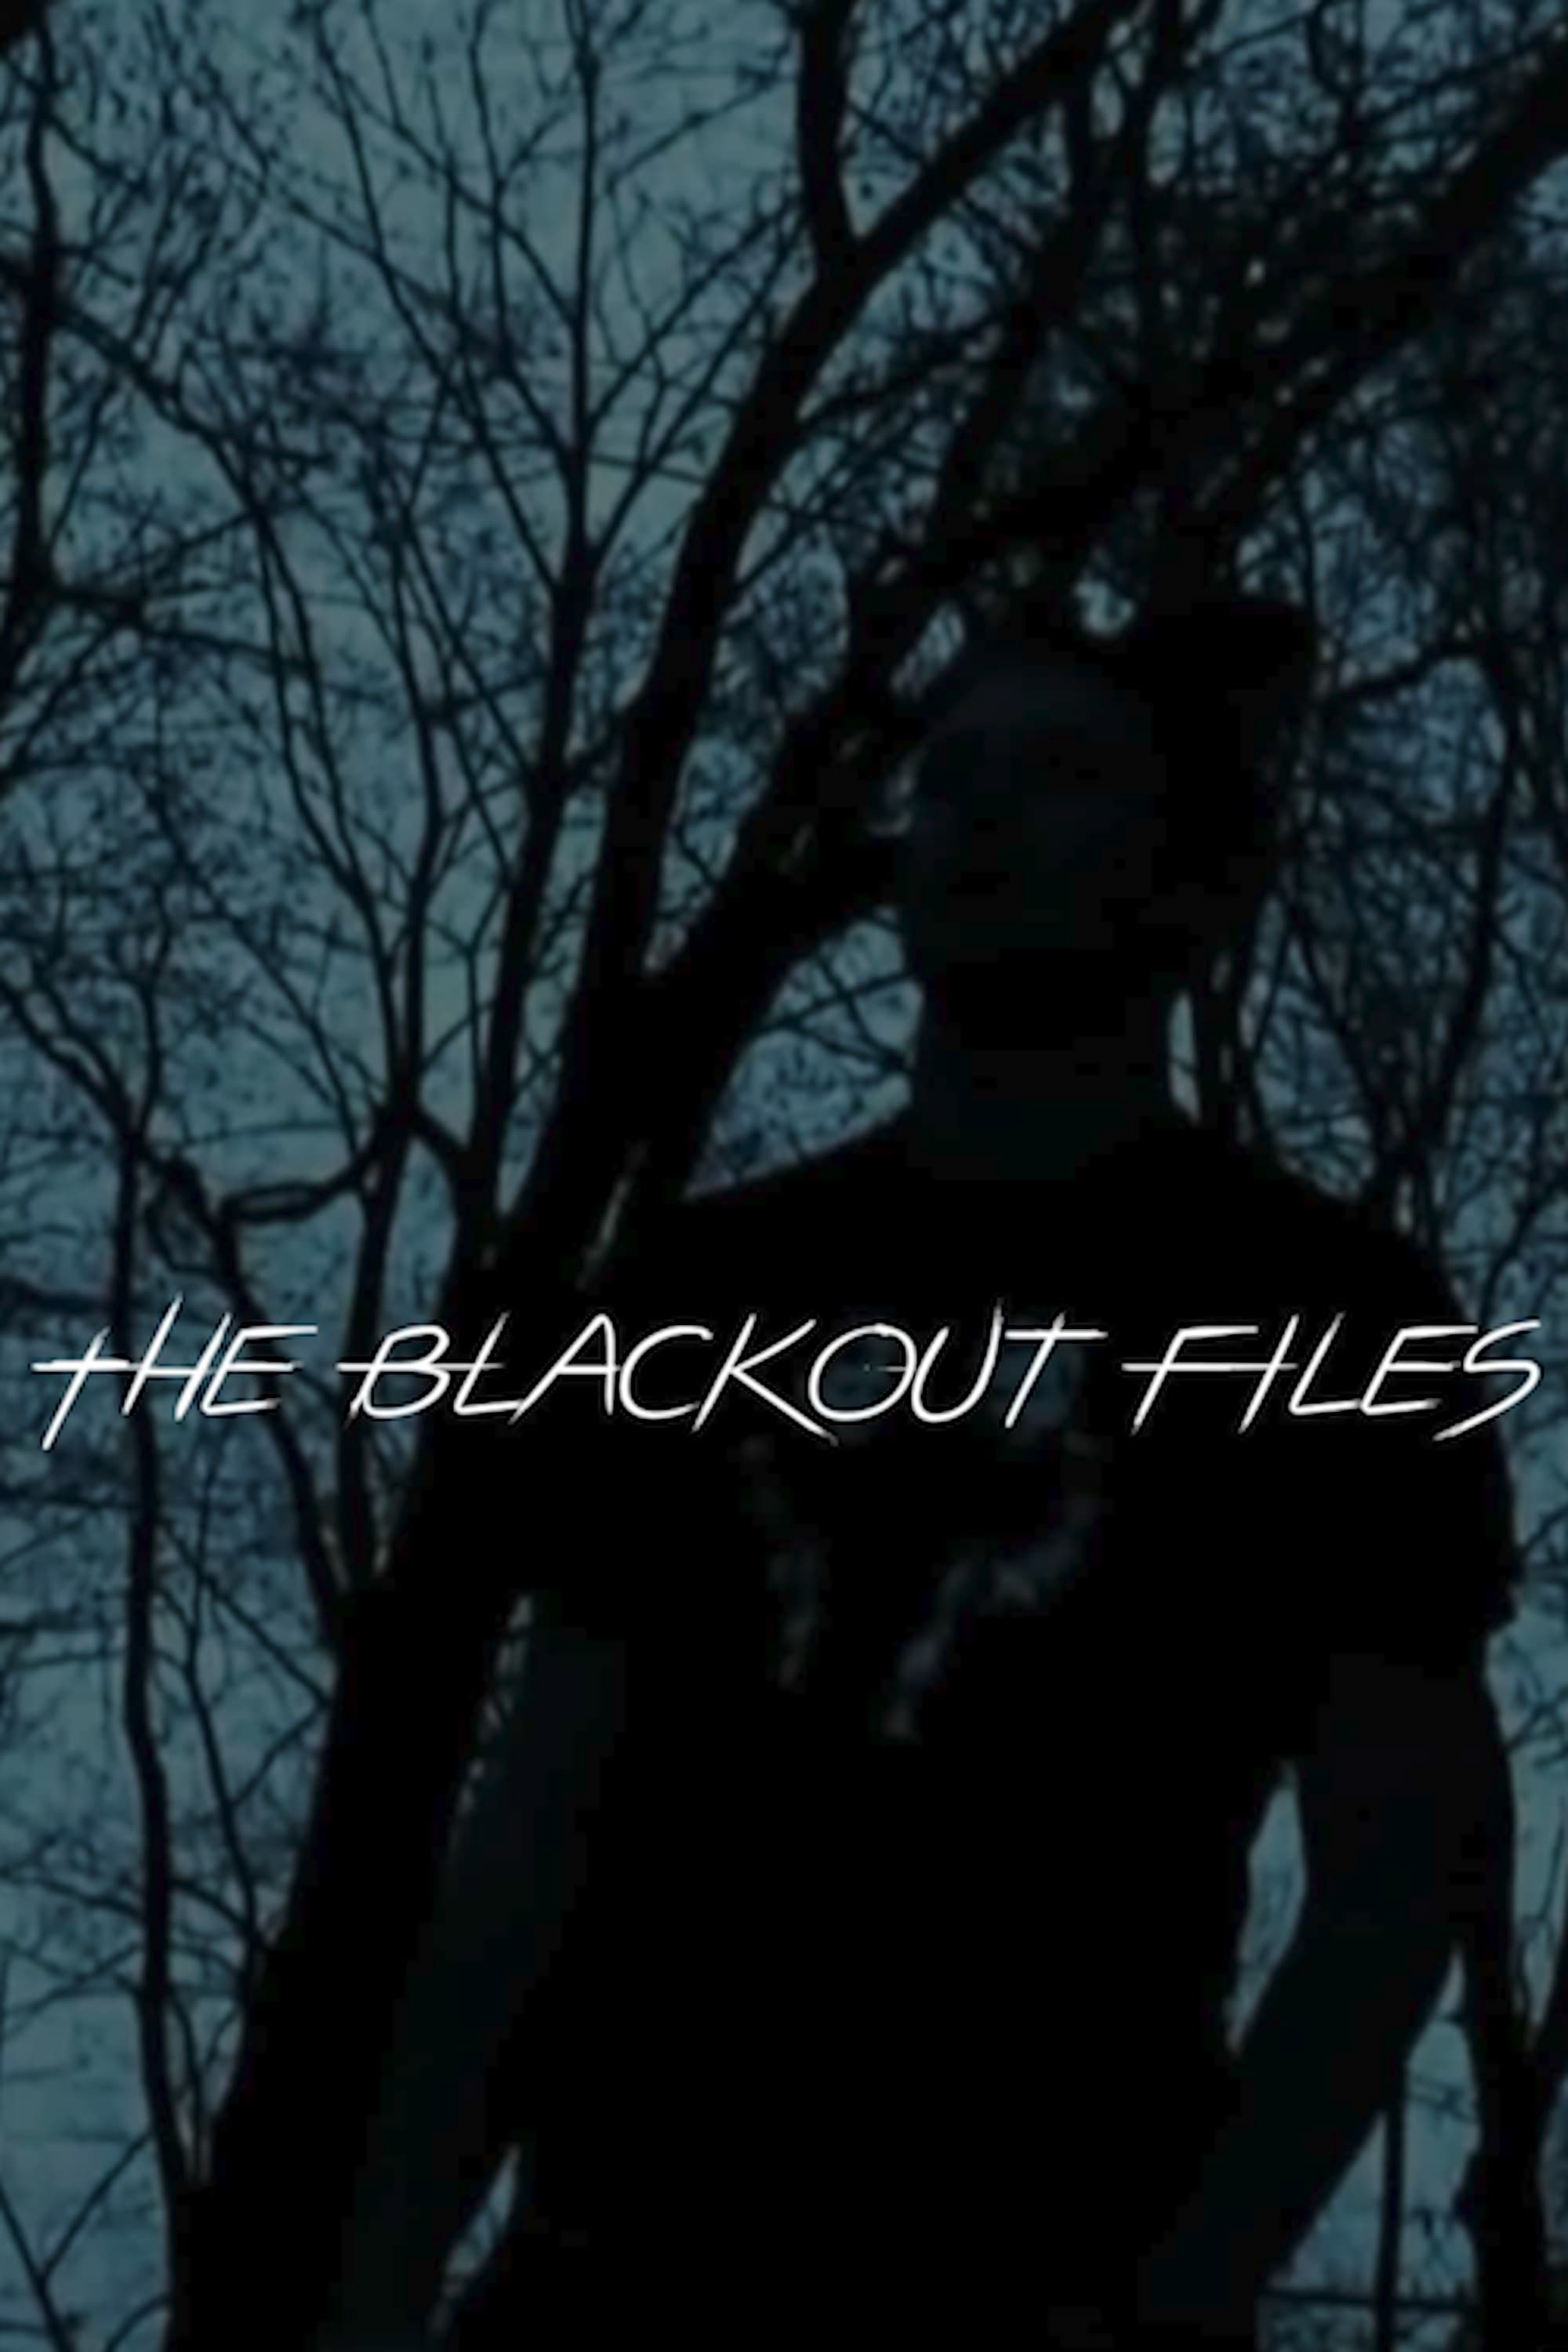 The Blackout Files